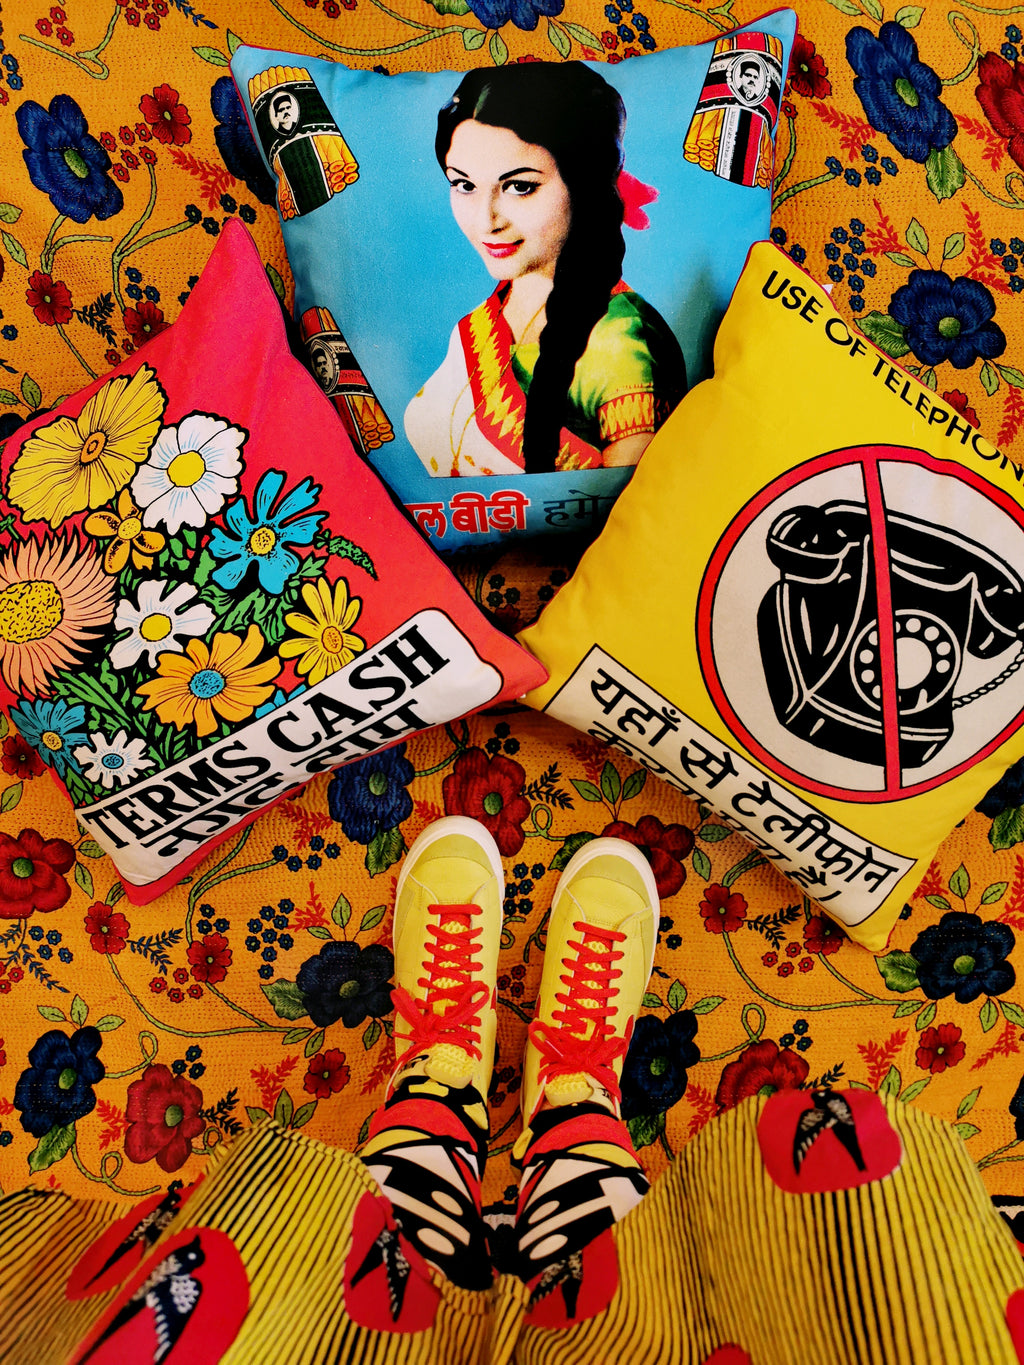 Our absolute favourite vintage packaging, advertising and bollywood combined in fabulous bright cushions to give your sofa a bit of vintage India style!

100% cotton, feather pad Included.

45cm x 45cm

